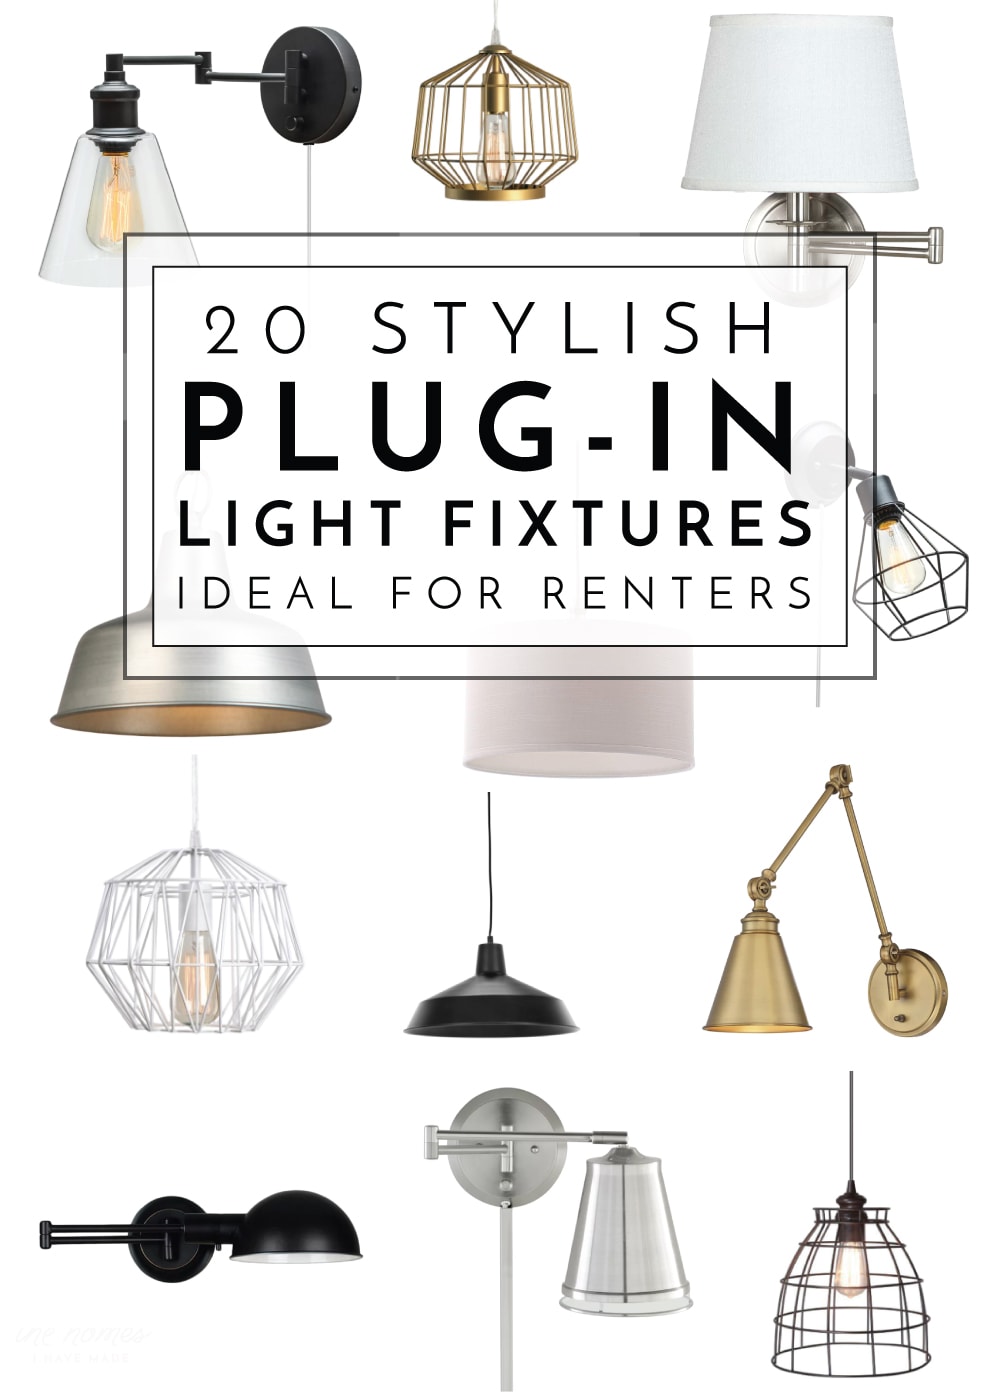 20 Stylish Plug In Light Fixtures Ideal For Renters The